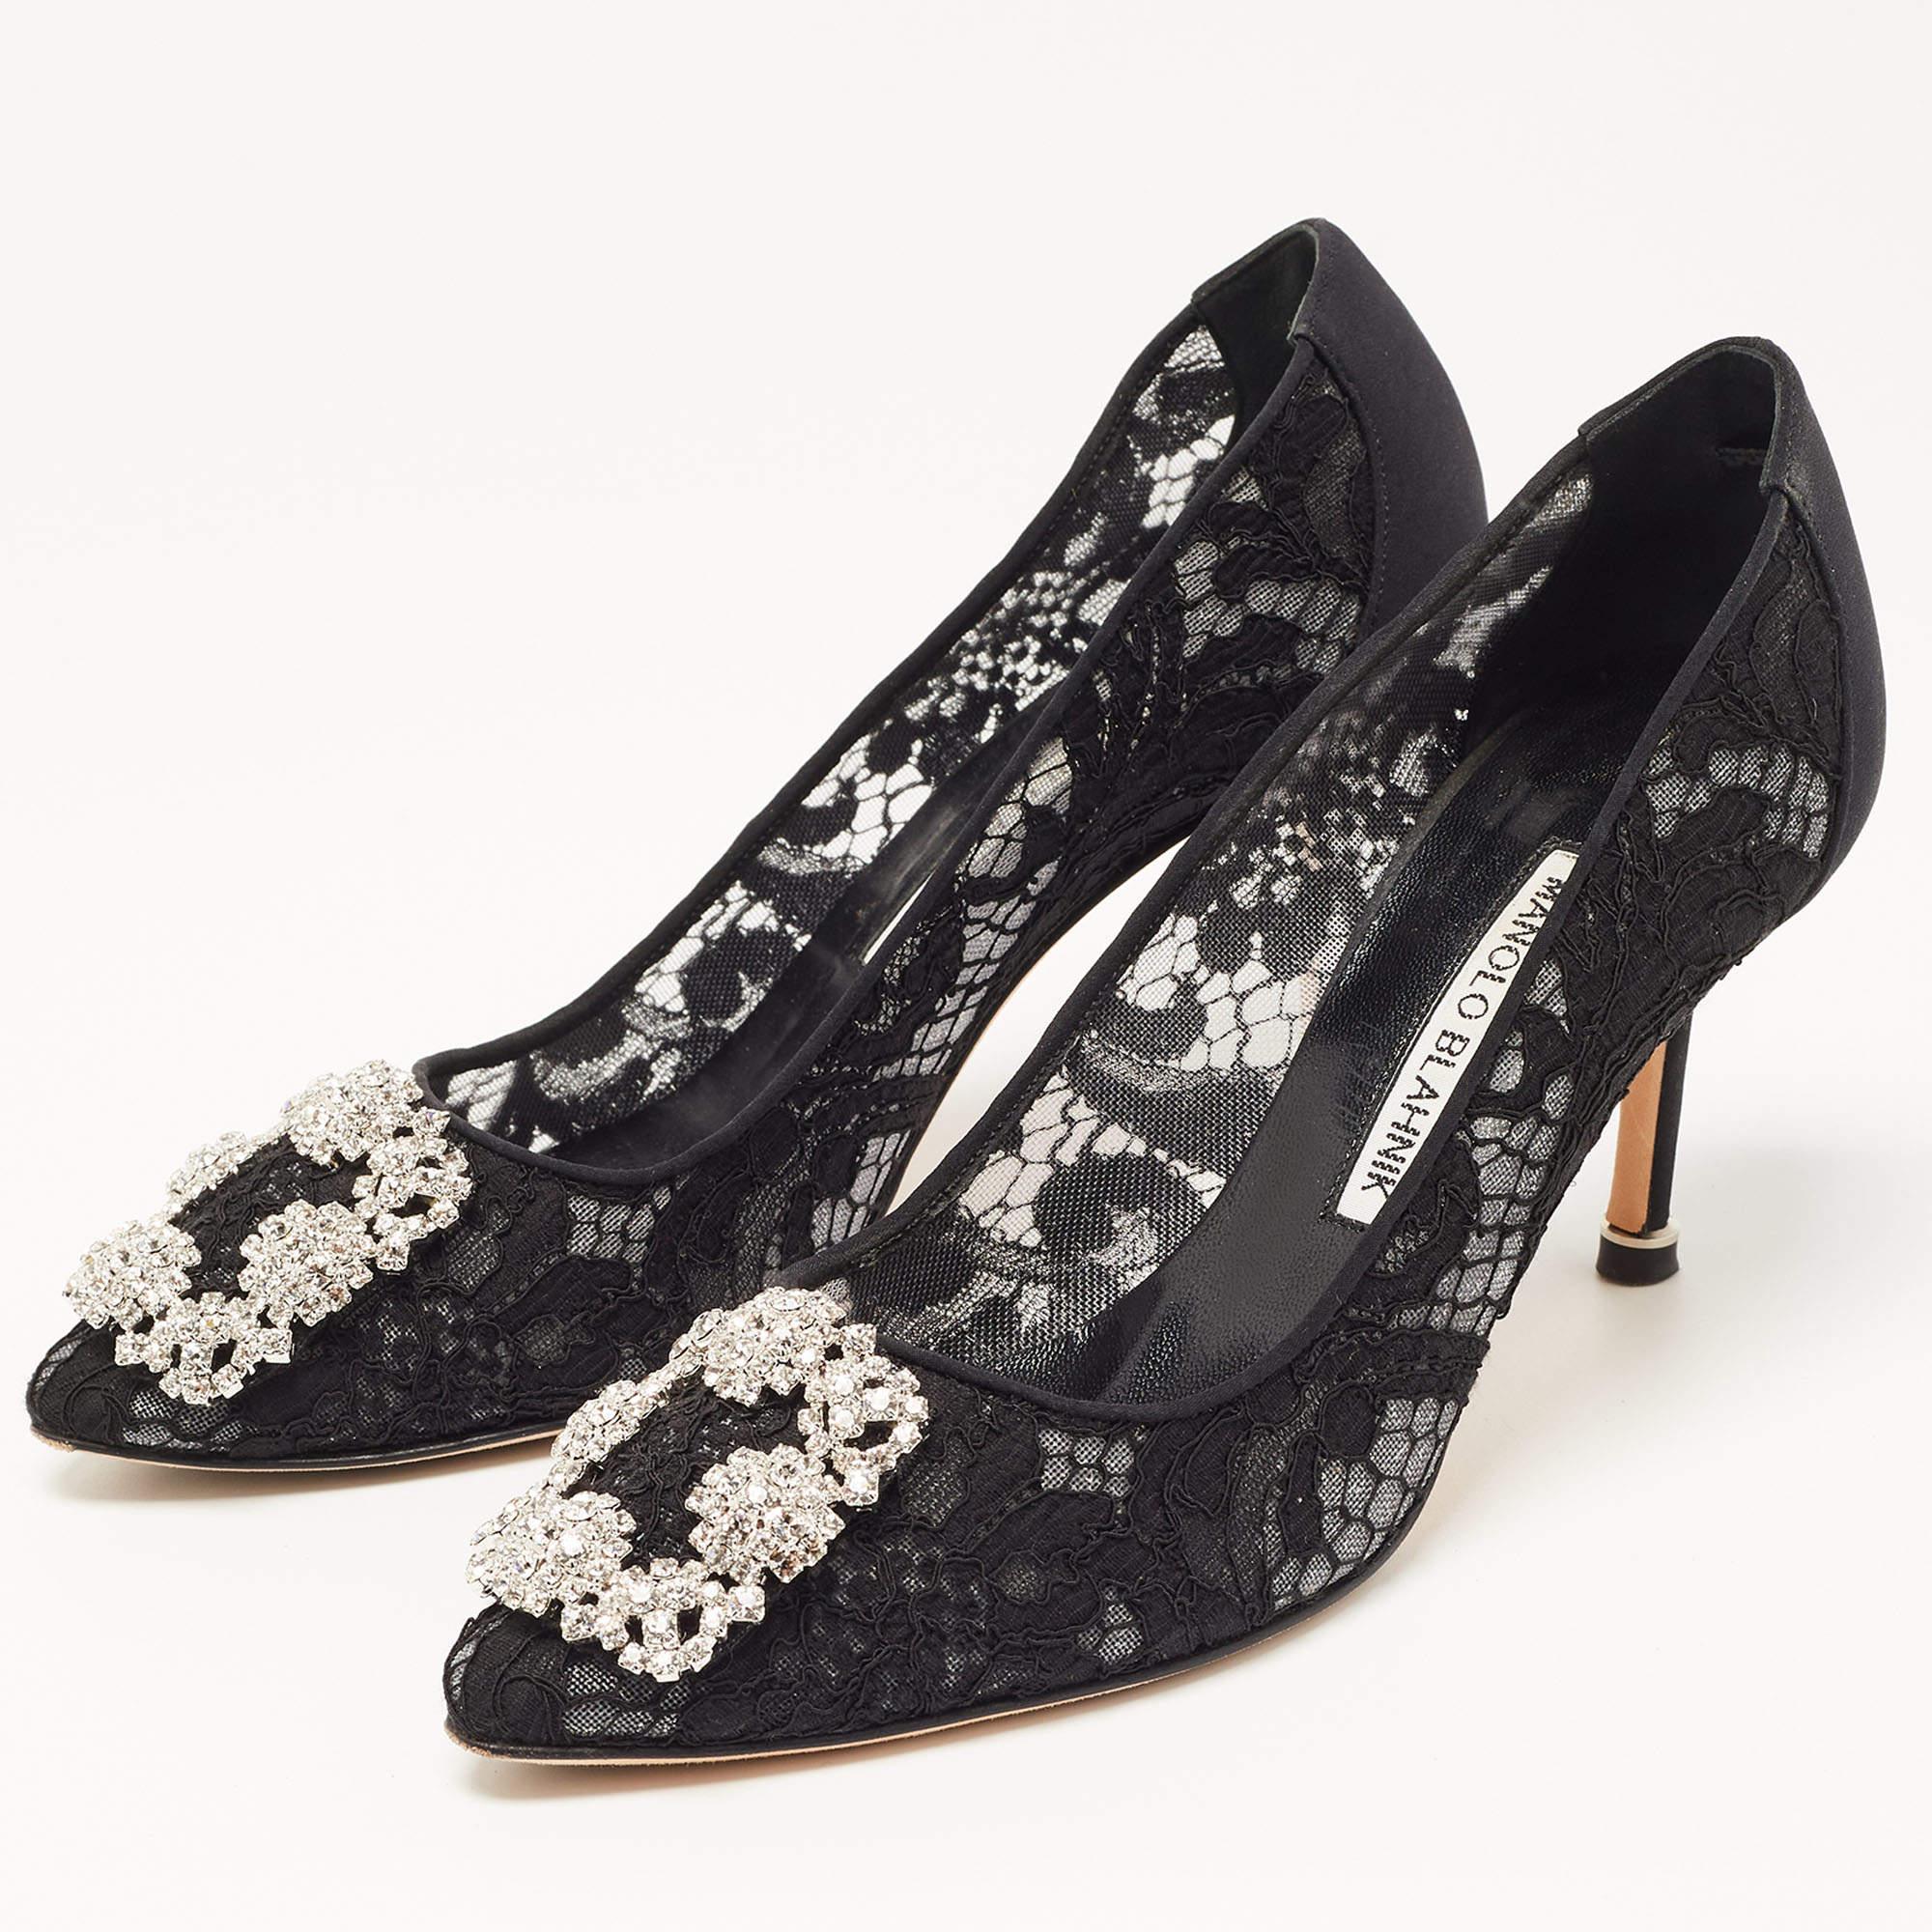 The 7cm heels of this pair of Manolo Blahnik pumps will reflect grace and luxury in every step. Made from lace, it is made striking with a crystal-embellished buckle detailing on the toes and exhibits branded insoles.

Includes: Original Dustbag,